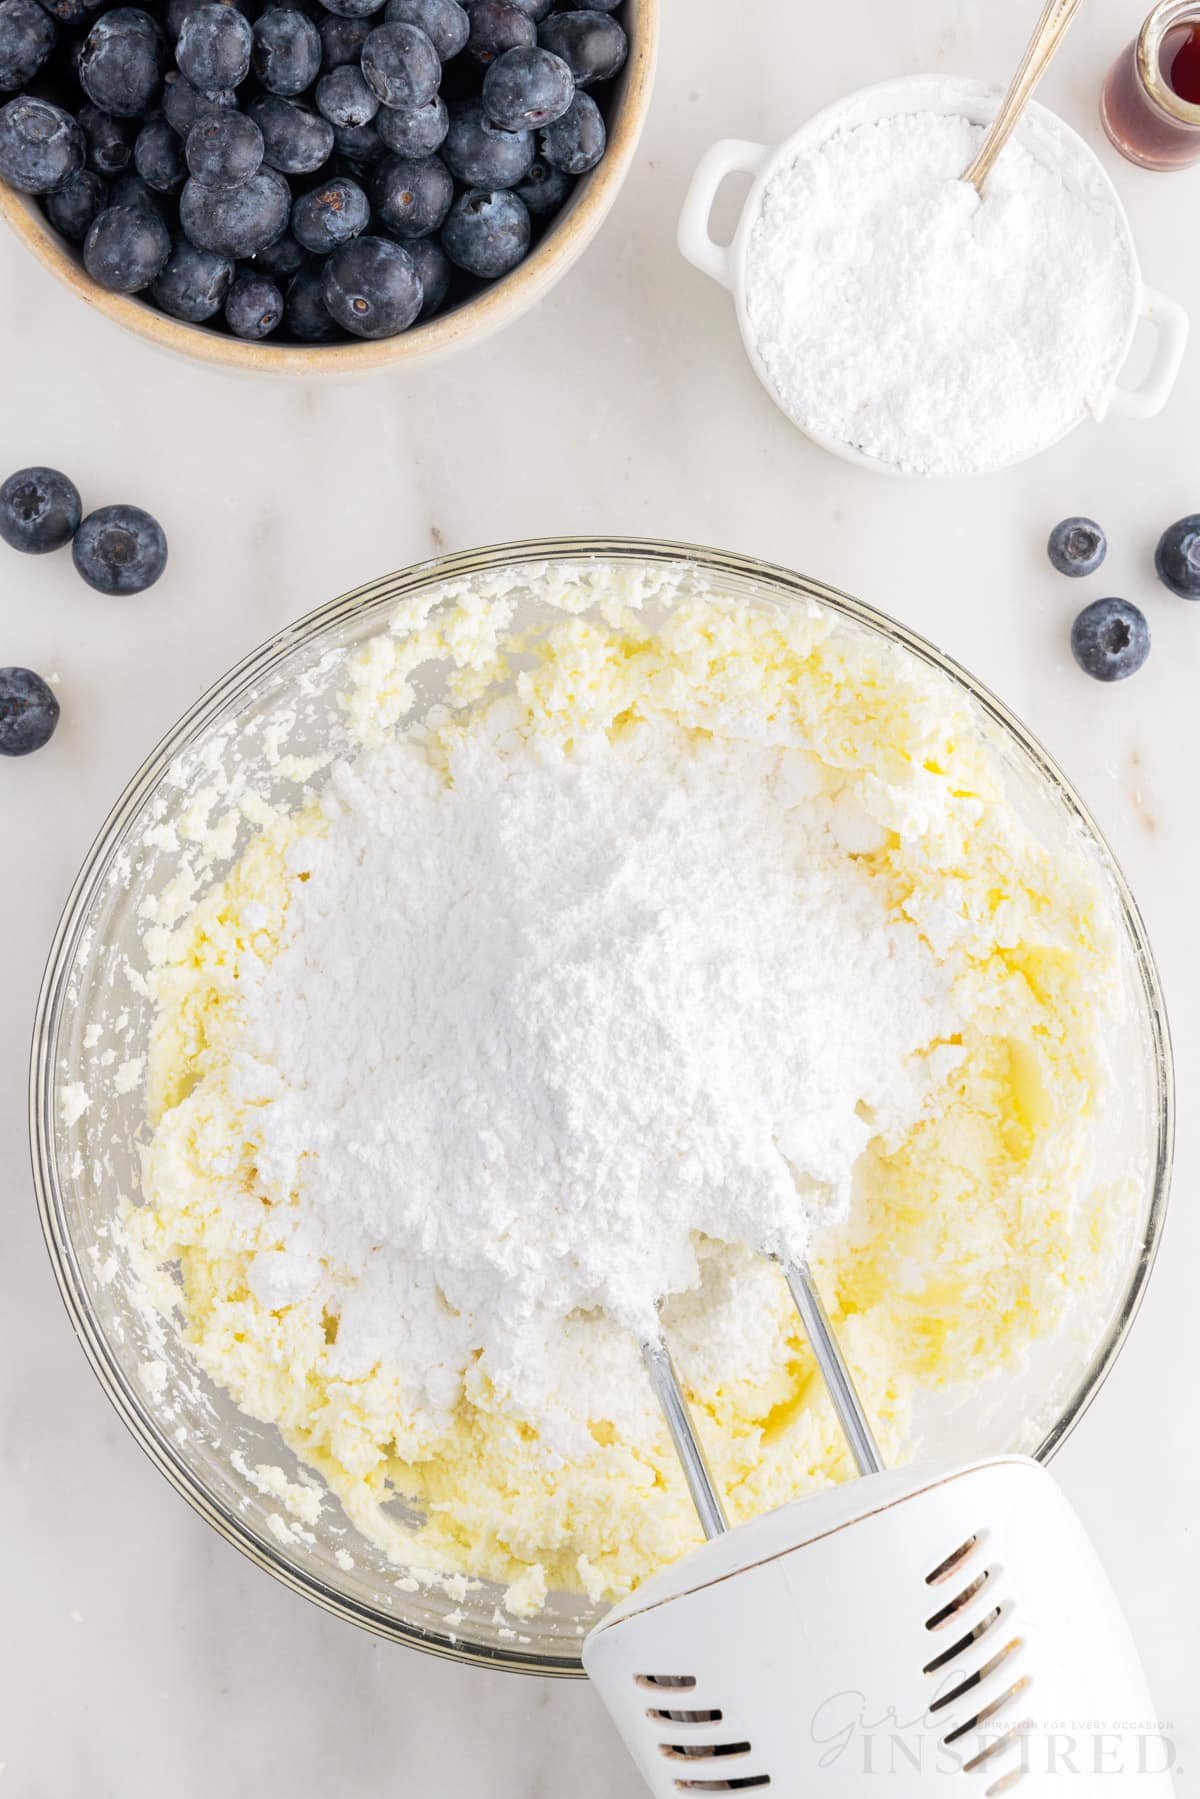 Powdered sugar added to butter mixture in a mixing bowl with a mixer inserted next to blueberries.